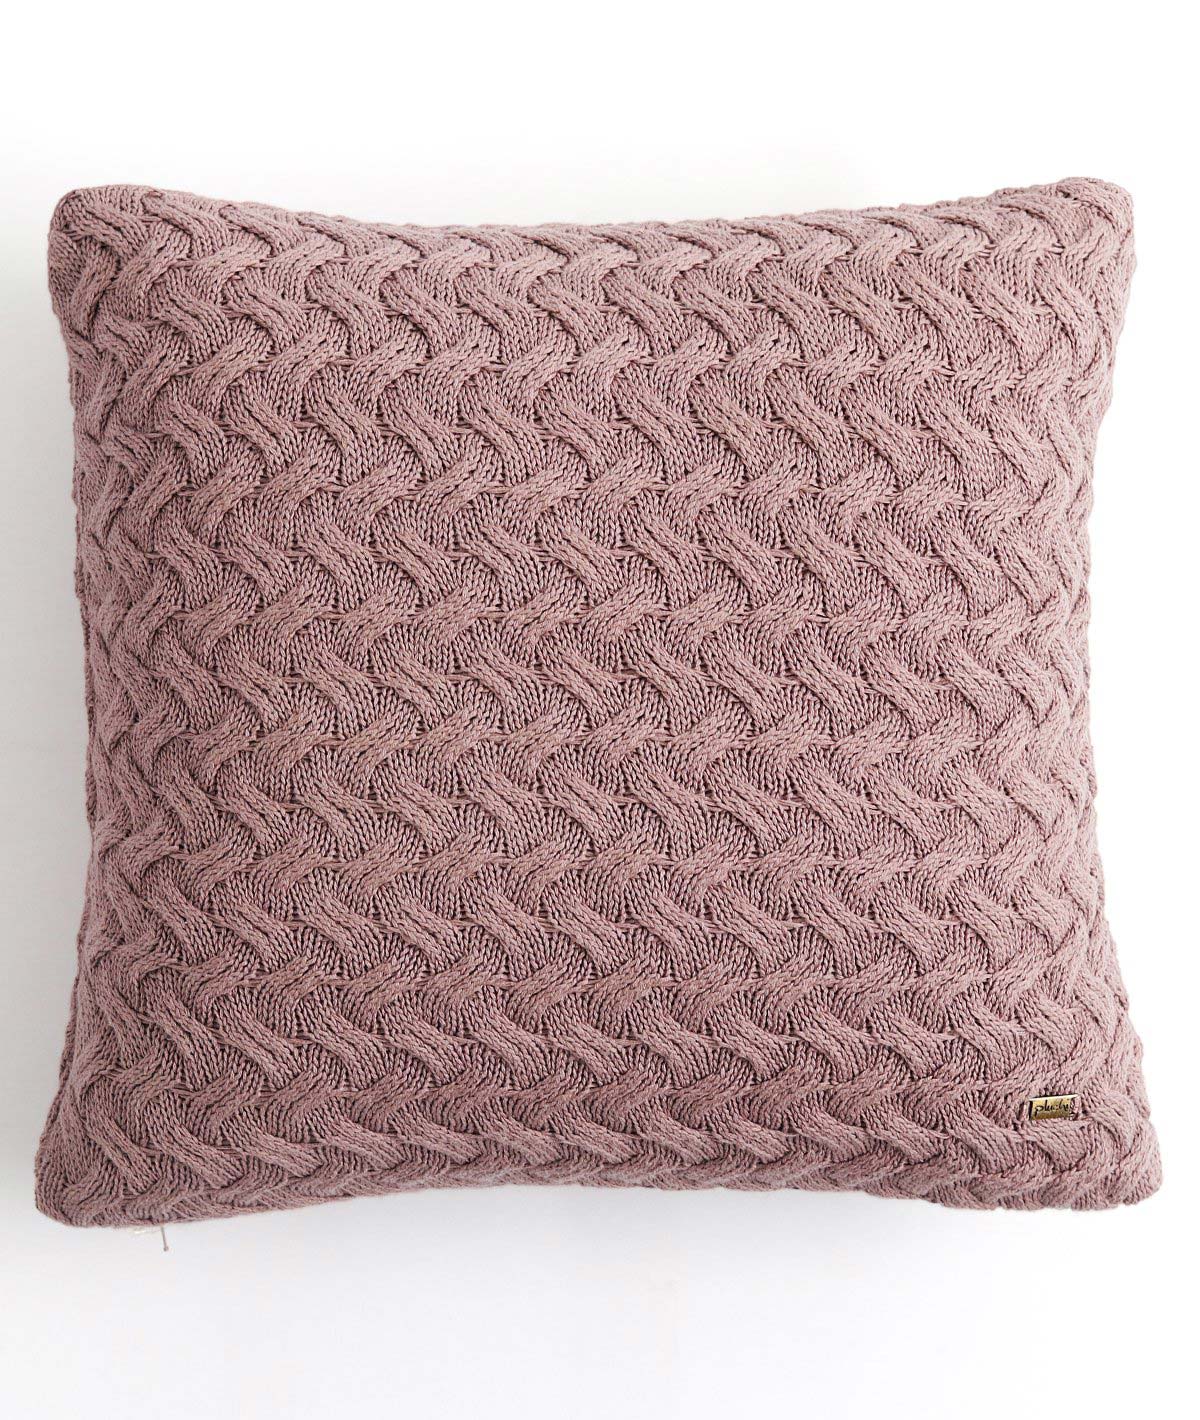 Buy cushion covers Online